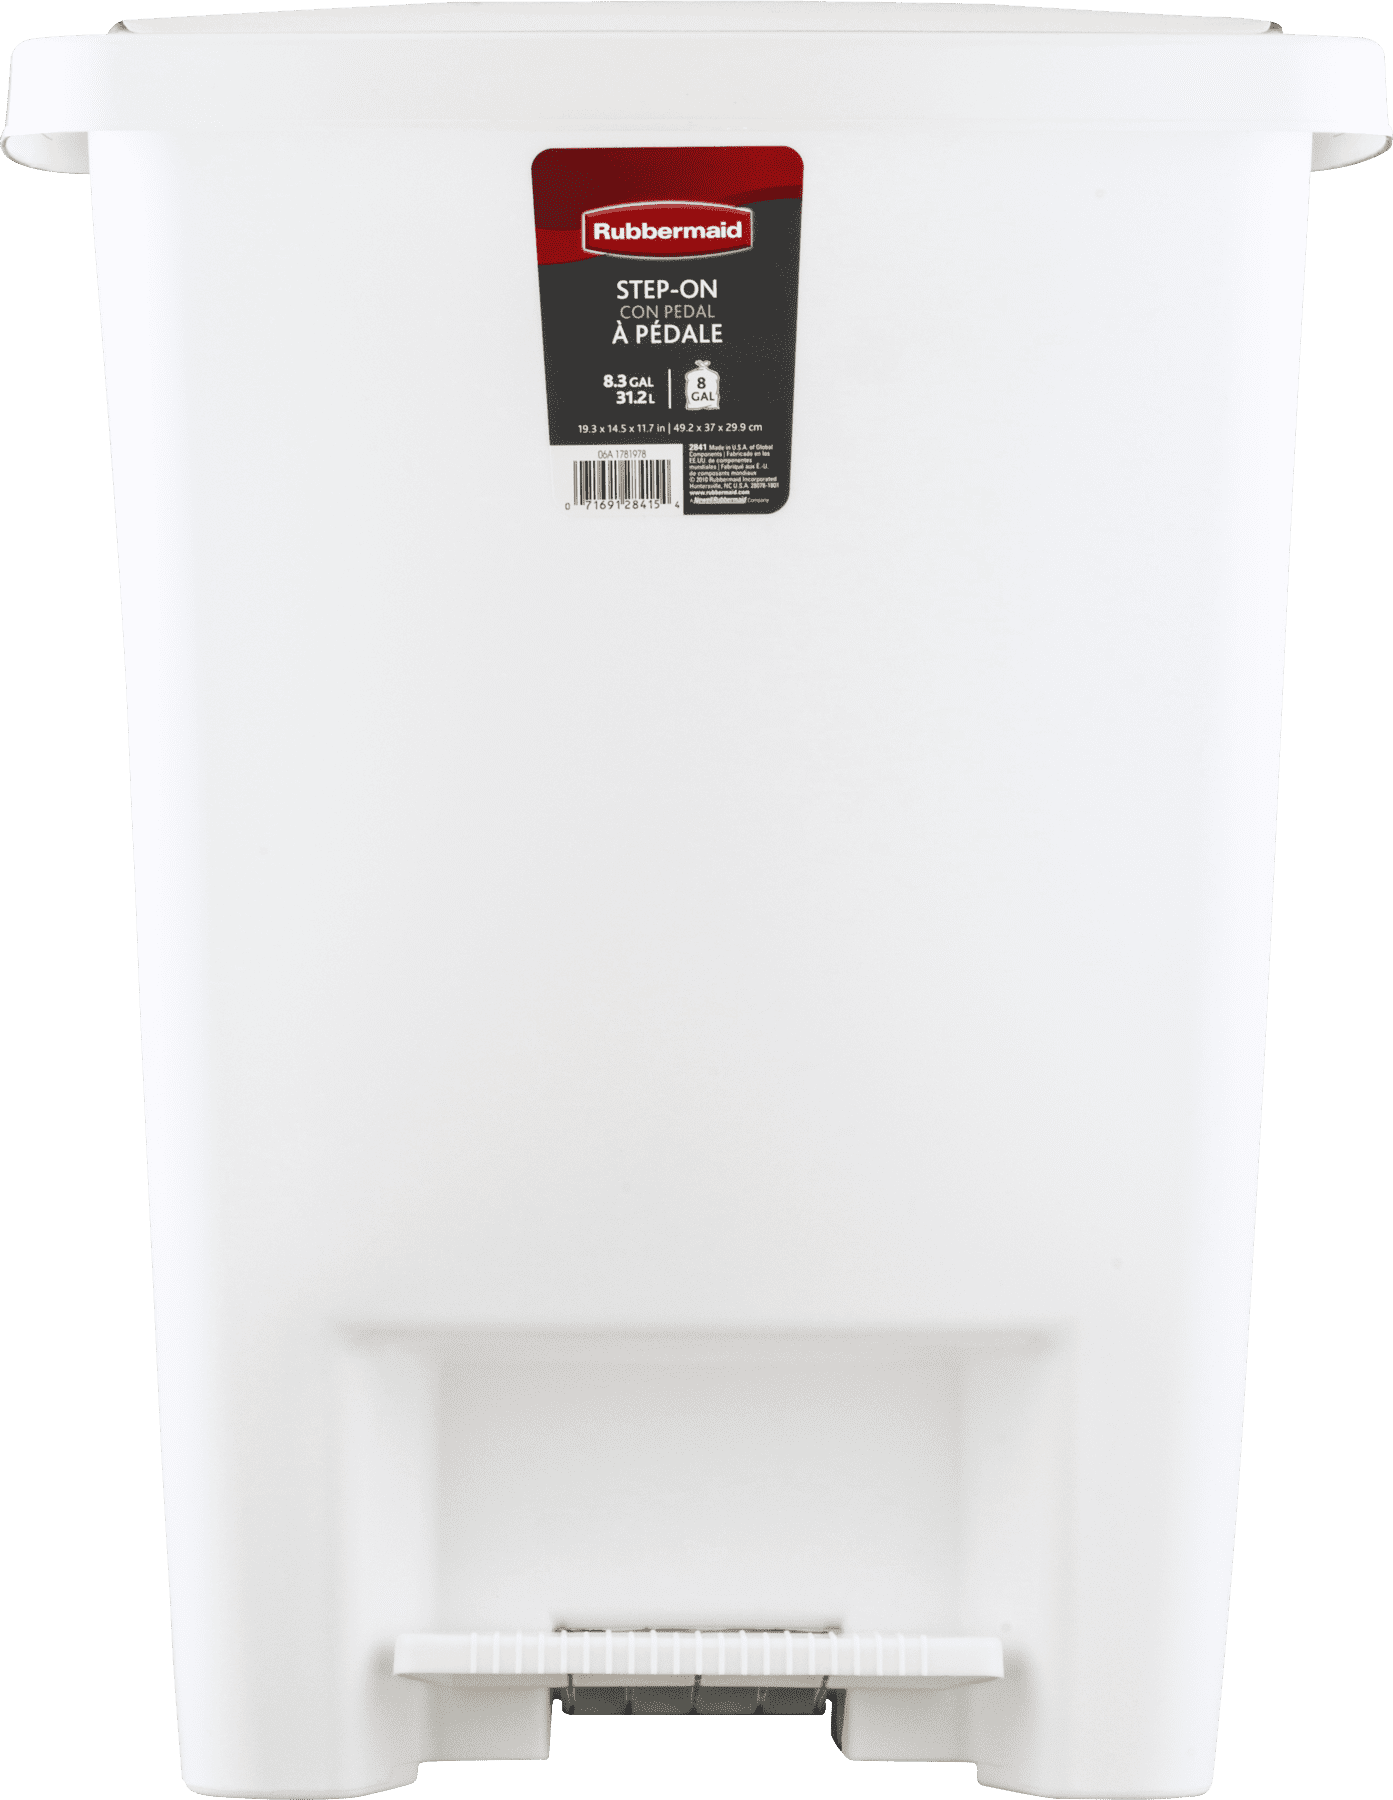  Rubbermaid Step On Lid Slim Plastic Trash Can for Home,  Kitchen, and Laundry Room Garbage, 11.3 Gallon, White : Home & Kitchen